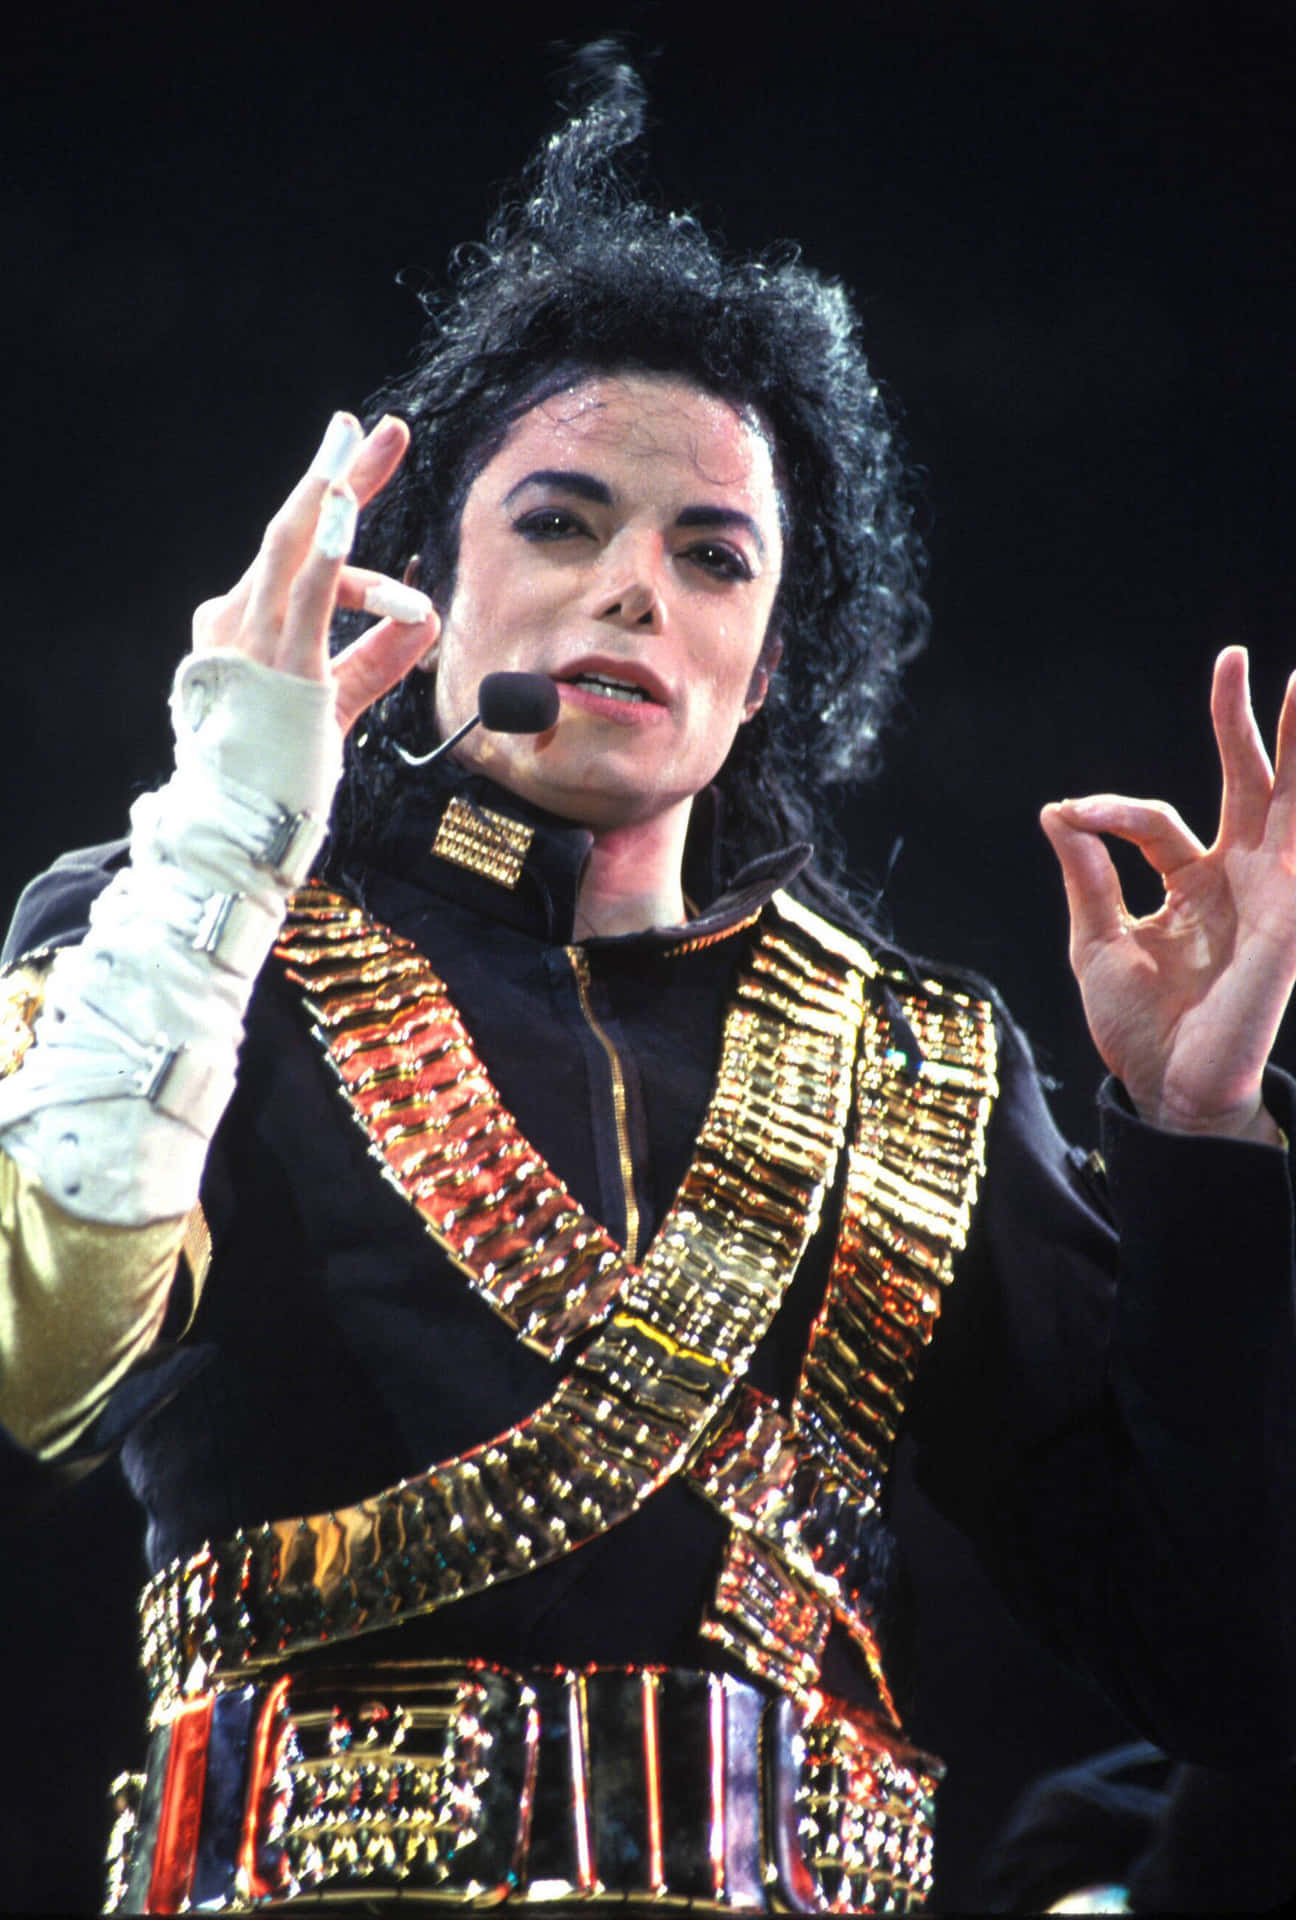 Michael Jackson performing on stage. Wallpaper